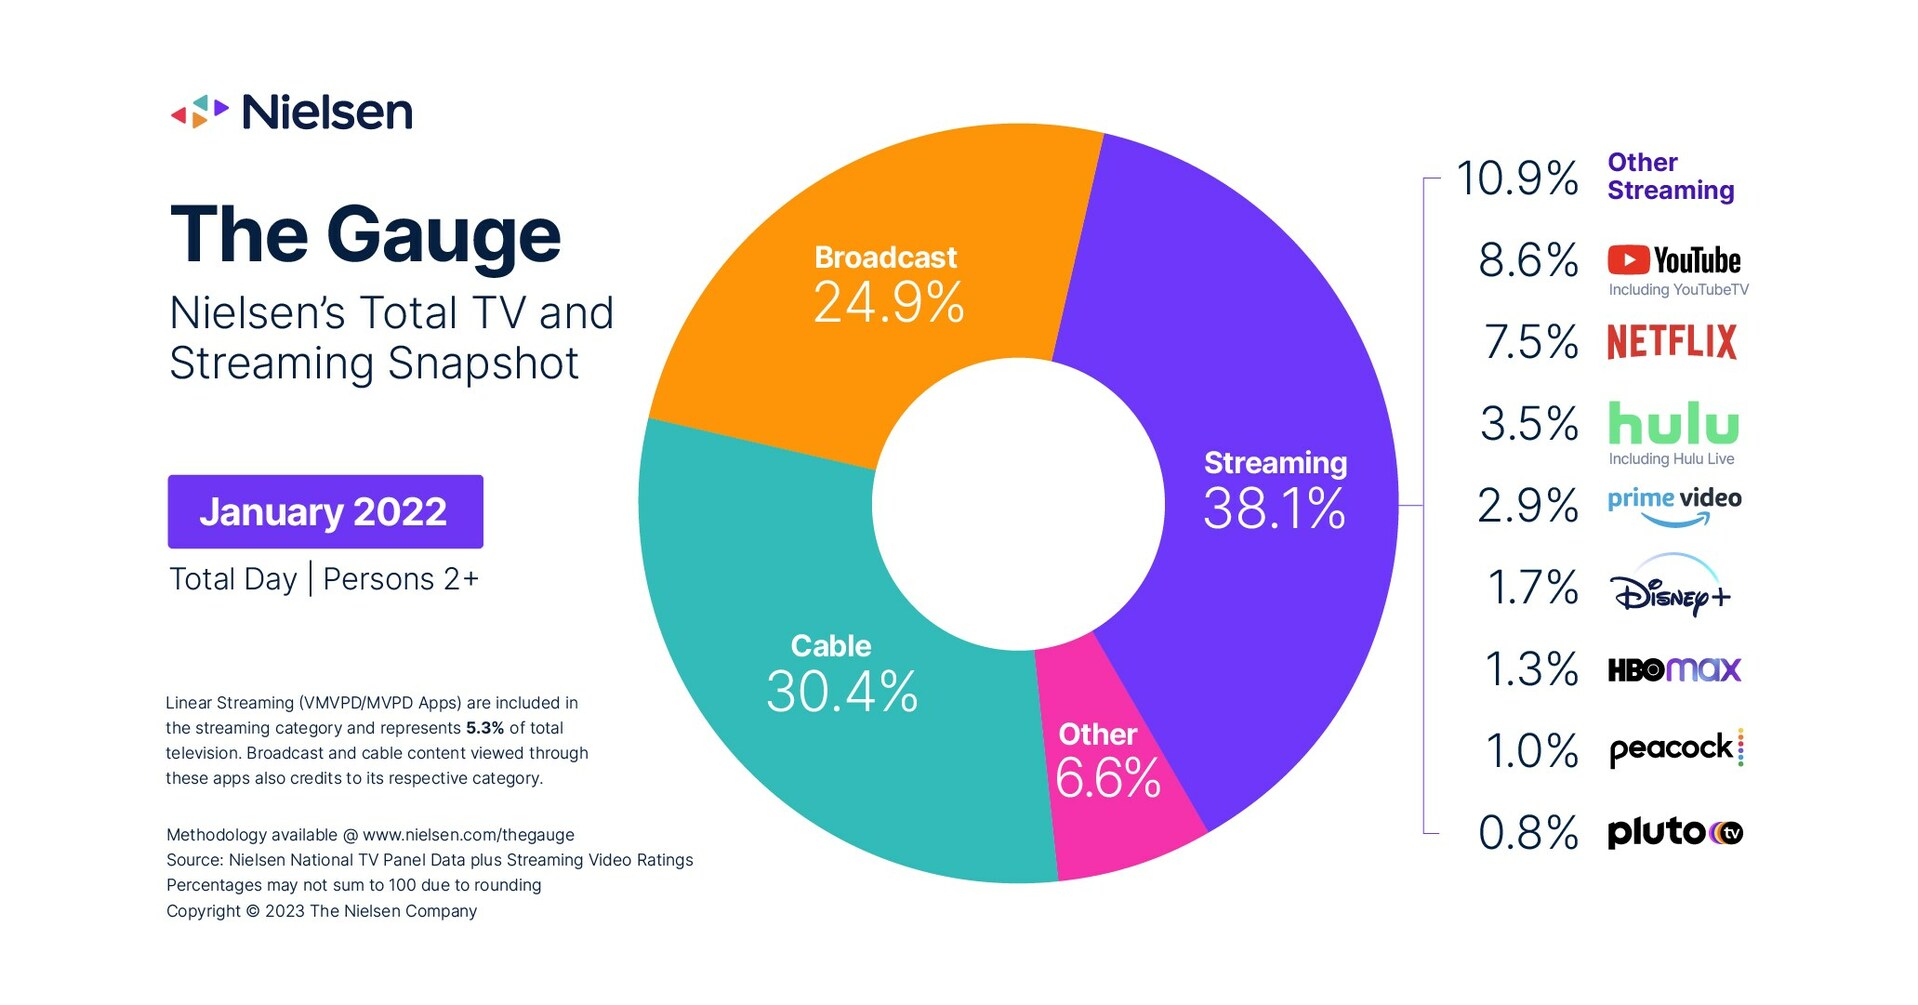 TV Usage Booms Again in January, Fueled by Broadcast and Streaming Content Viewing, according to The Gauge